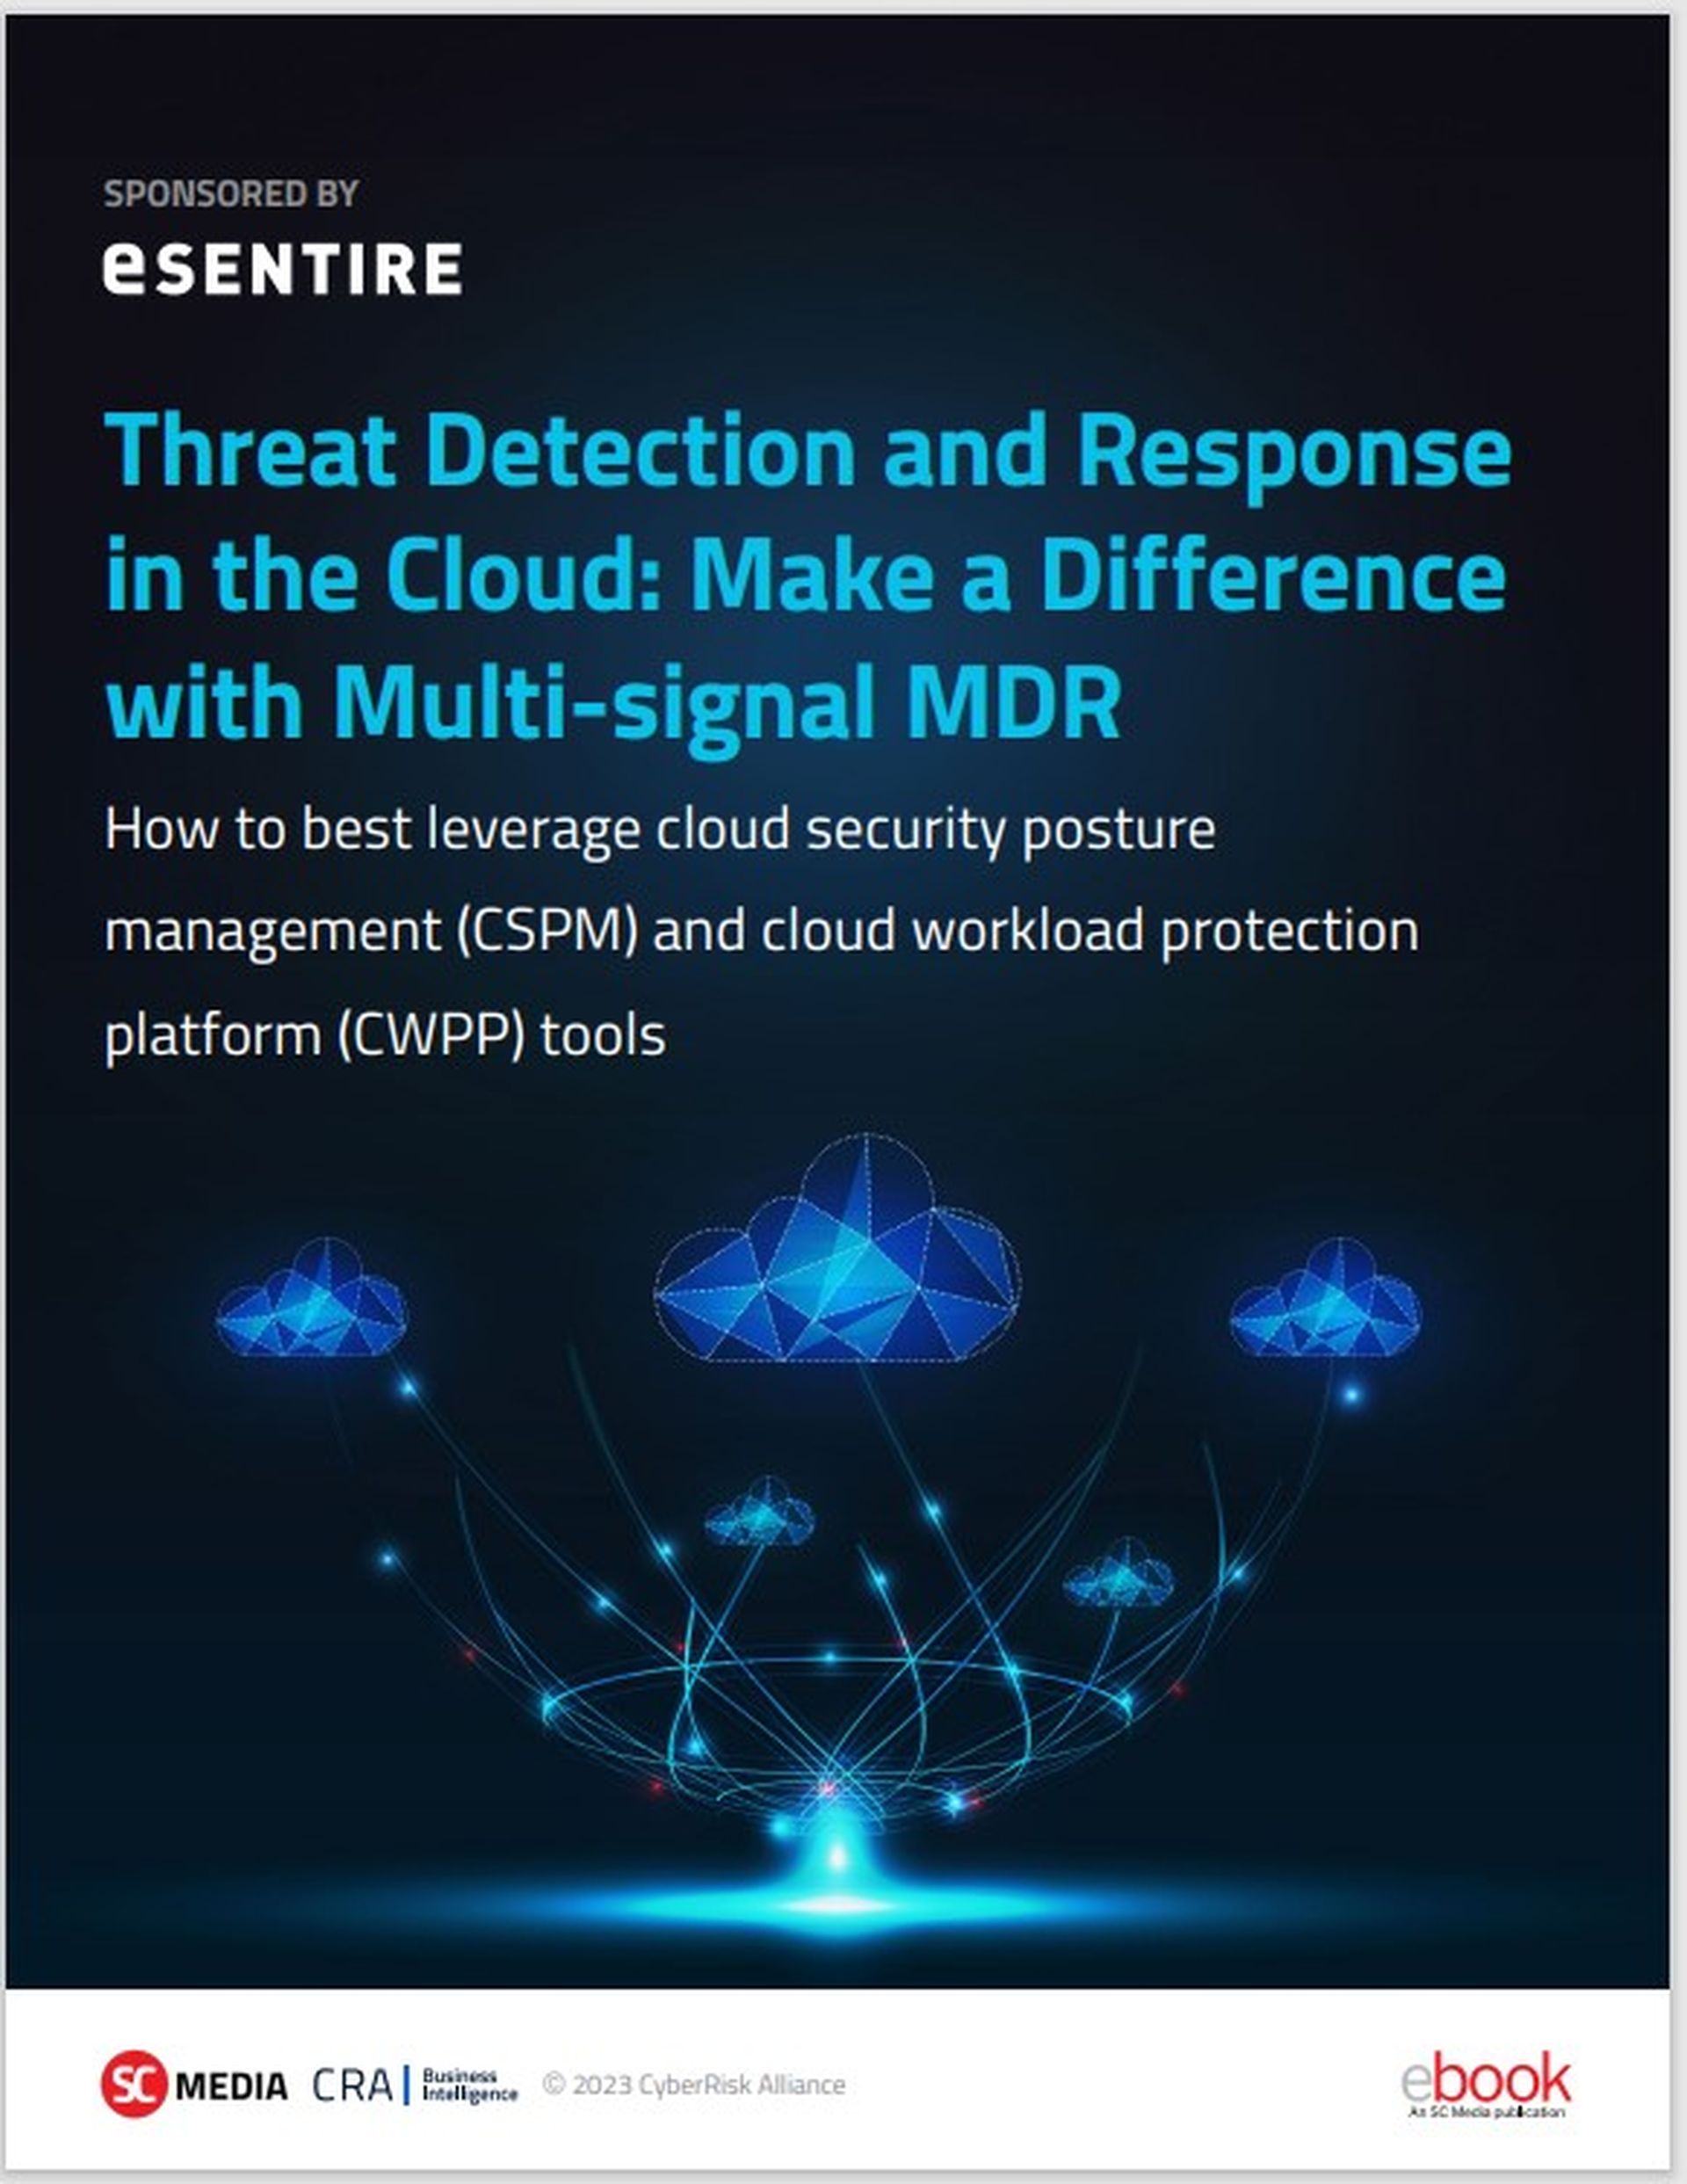 Threat Detection and Response in the Cloud: Make a Difference with Multi-signal MDR